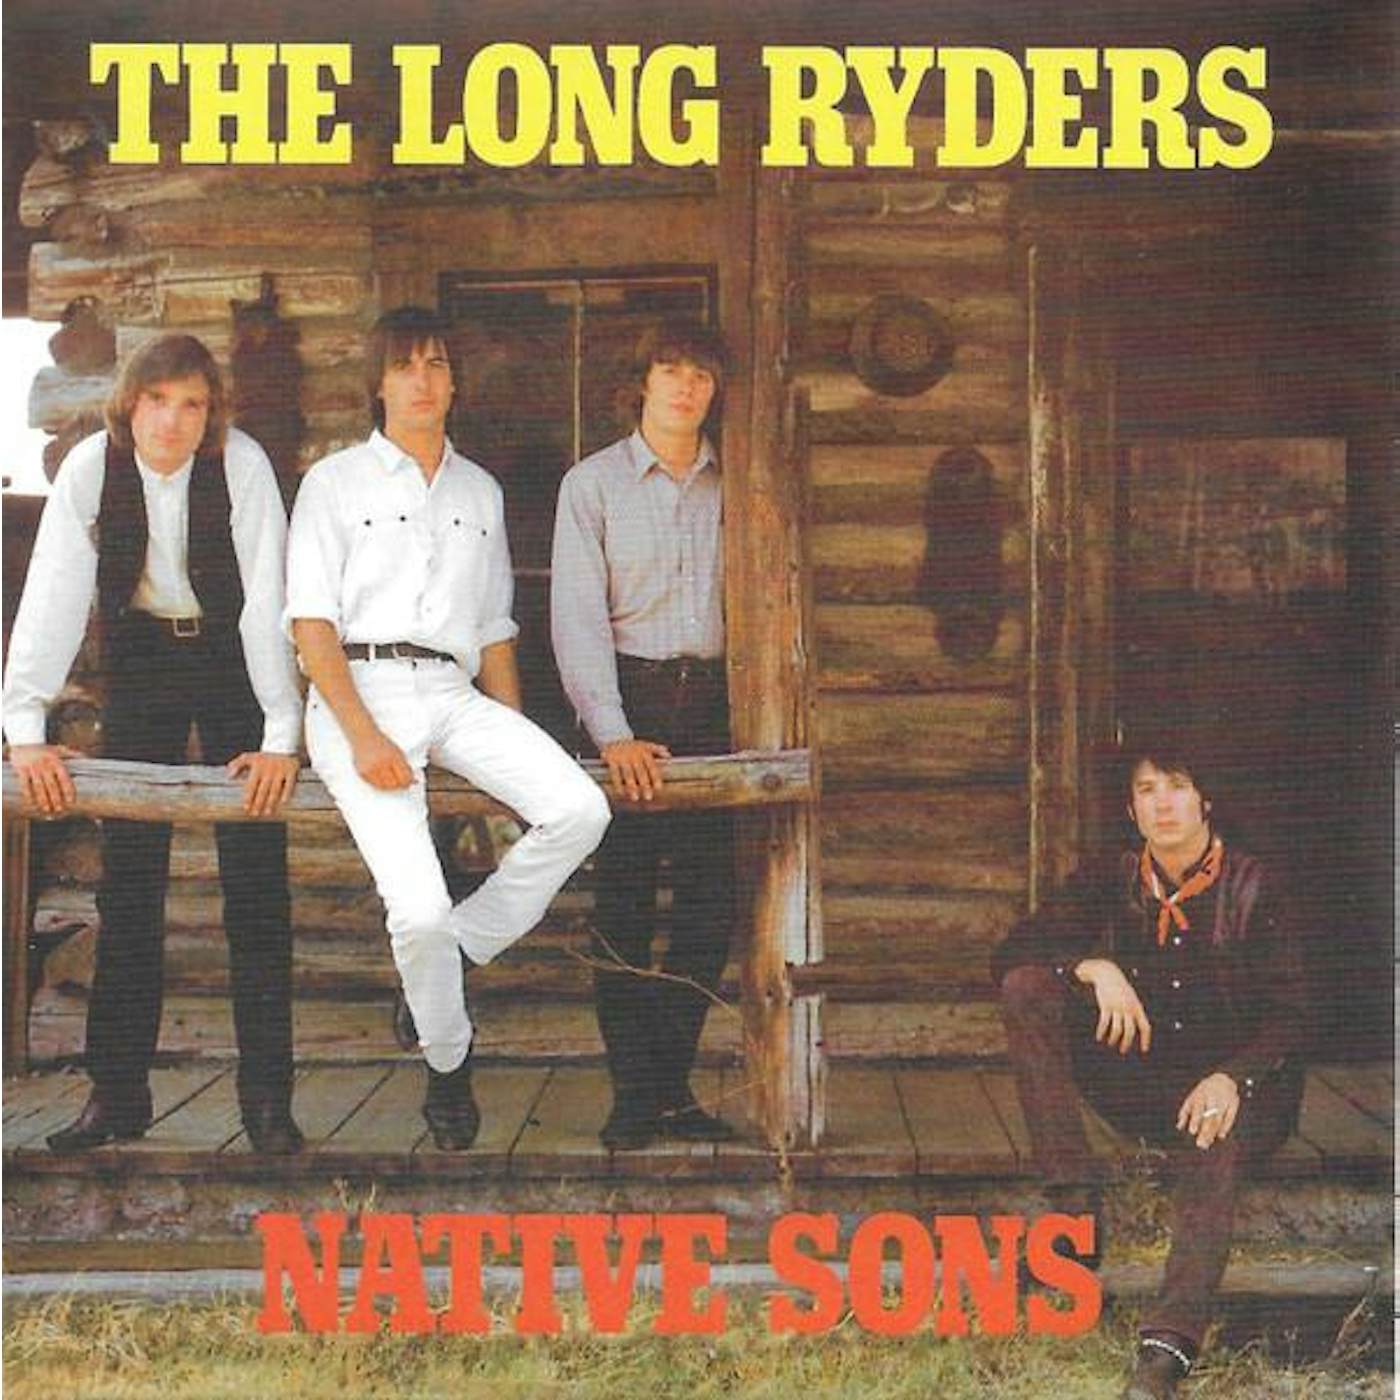 The Long Ryders NATIVE SONS (EXPANDED/3CD CLAMSHELL BOX) CD